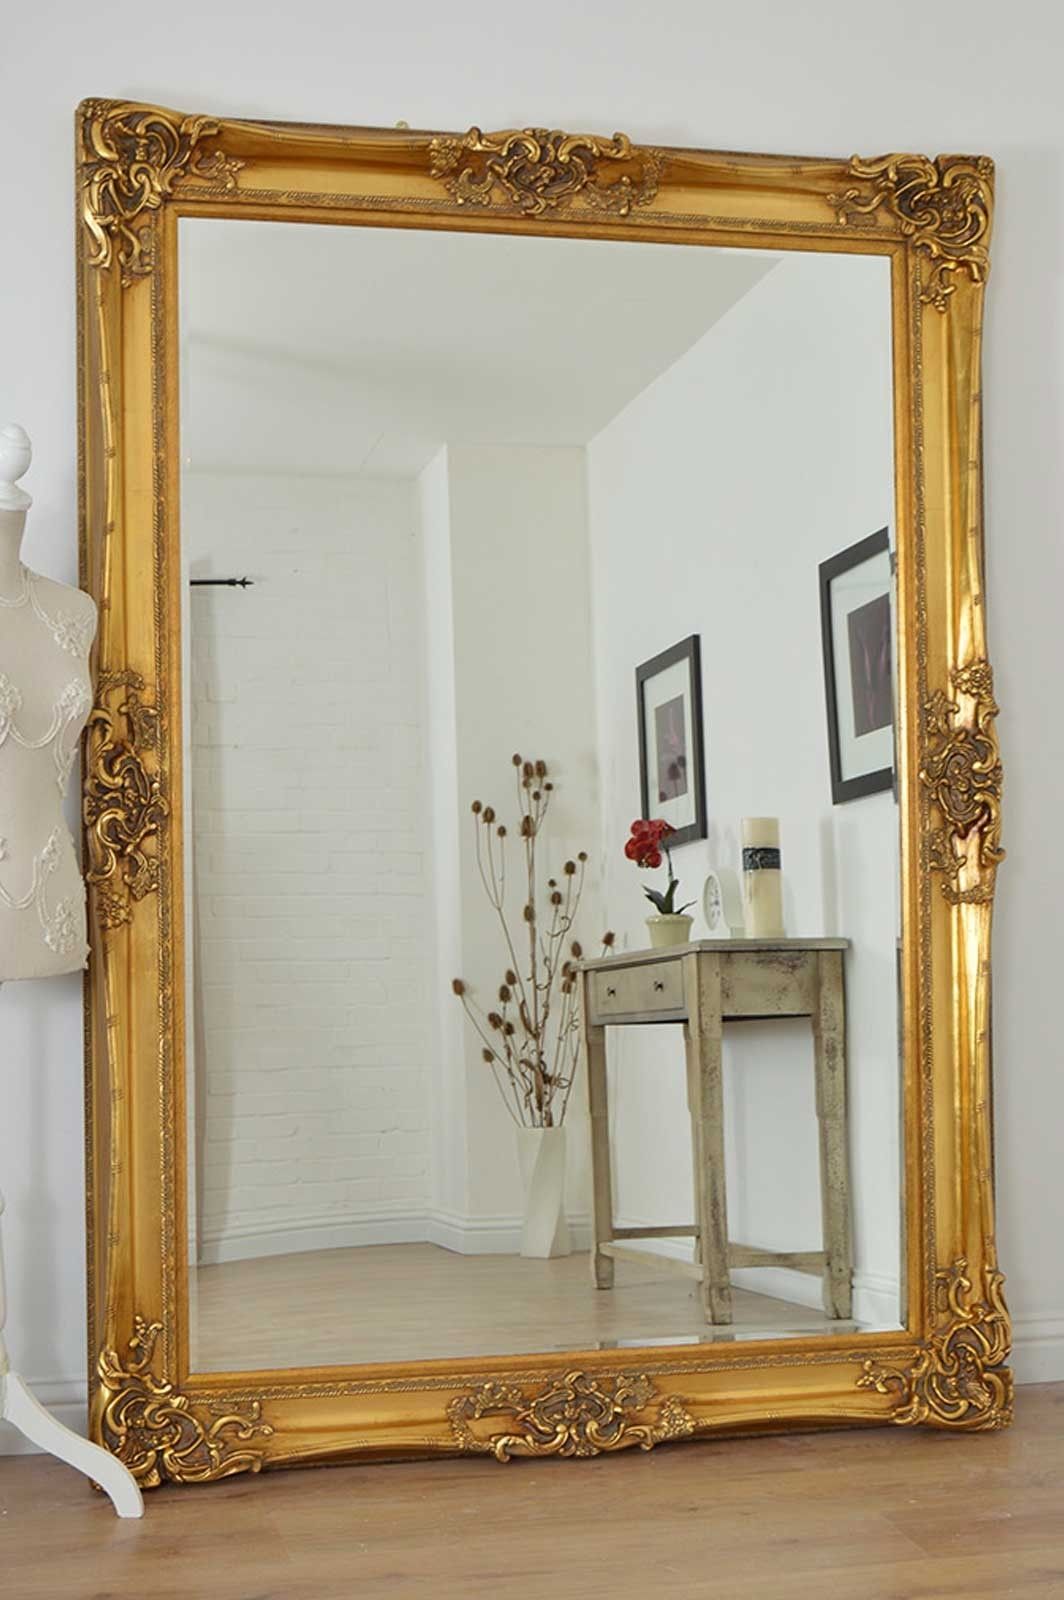 Large Gold Very Ornate Antique Design Wall Mirror 7ft X 5ft 213cm Intended For Large Ornate Gold Mirror (View 1 of 15)